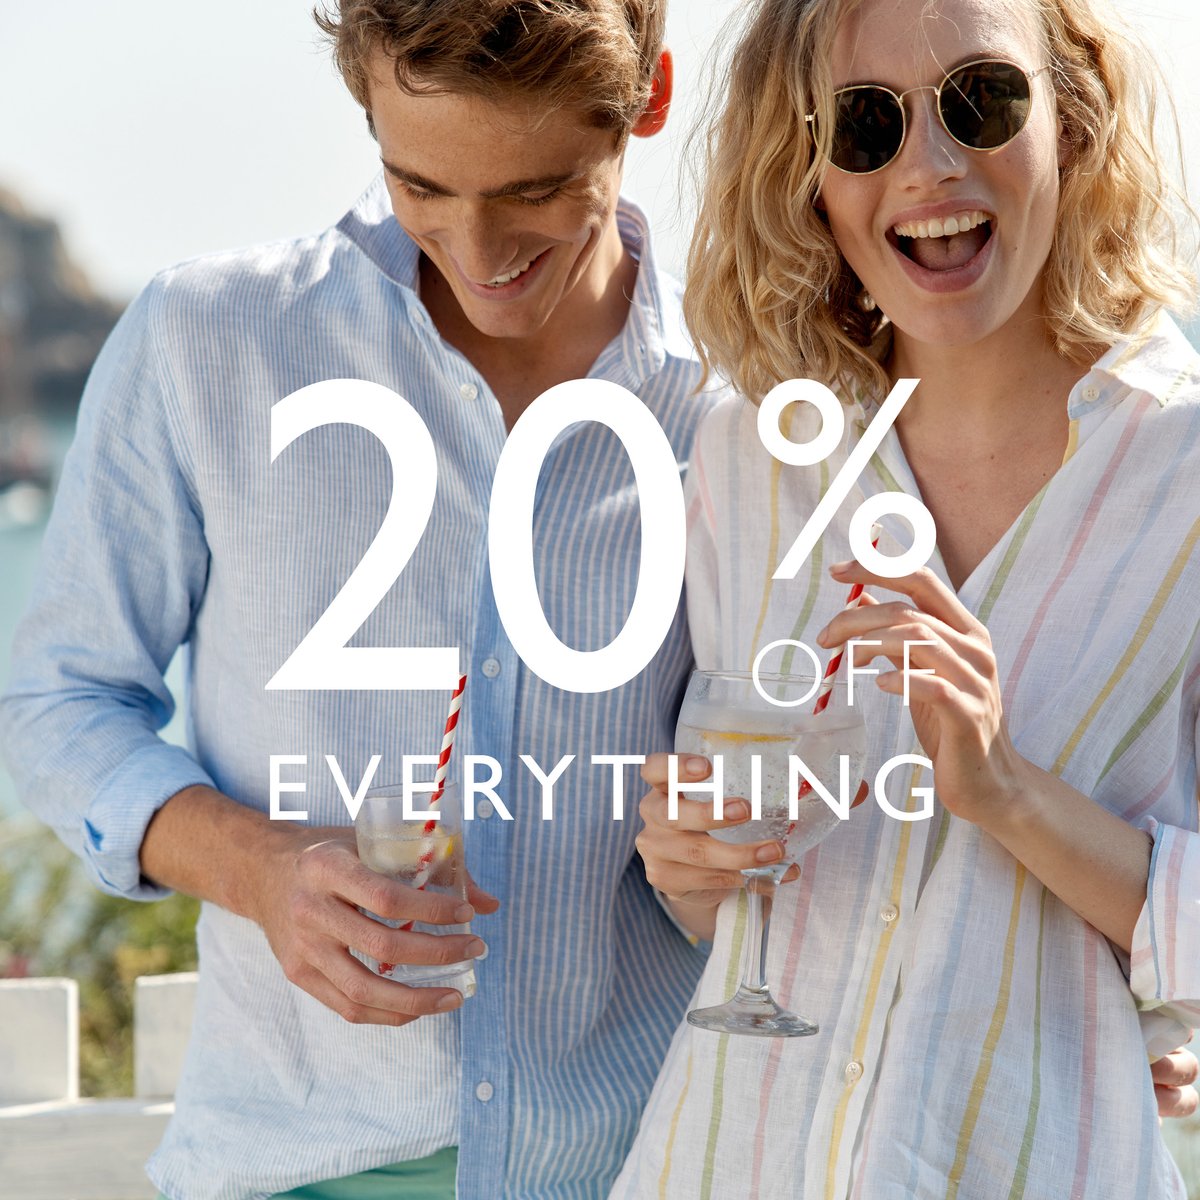 Good weather is finally on the way! With 20% off everything from linen shirts to boxers and dresses, now’s the time to invest in those pieces you’ve been eyeing... Shop the sale now: beaufortandblake.com